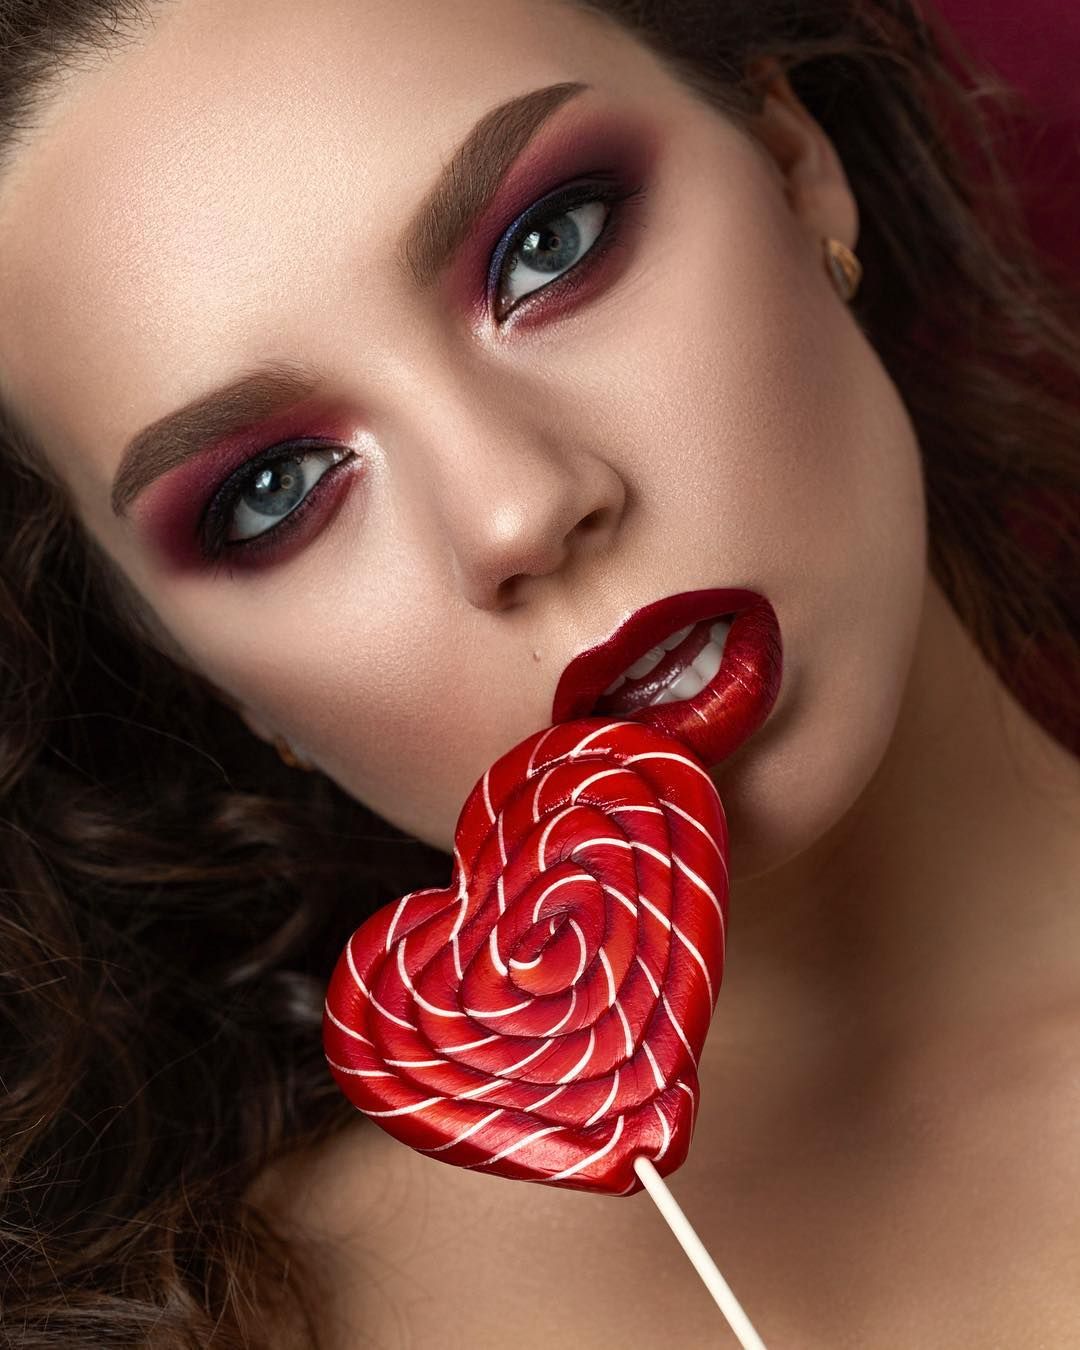 Lady With Creative Make Up And Red Heart Lollipop